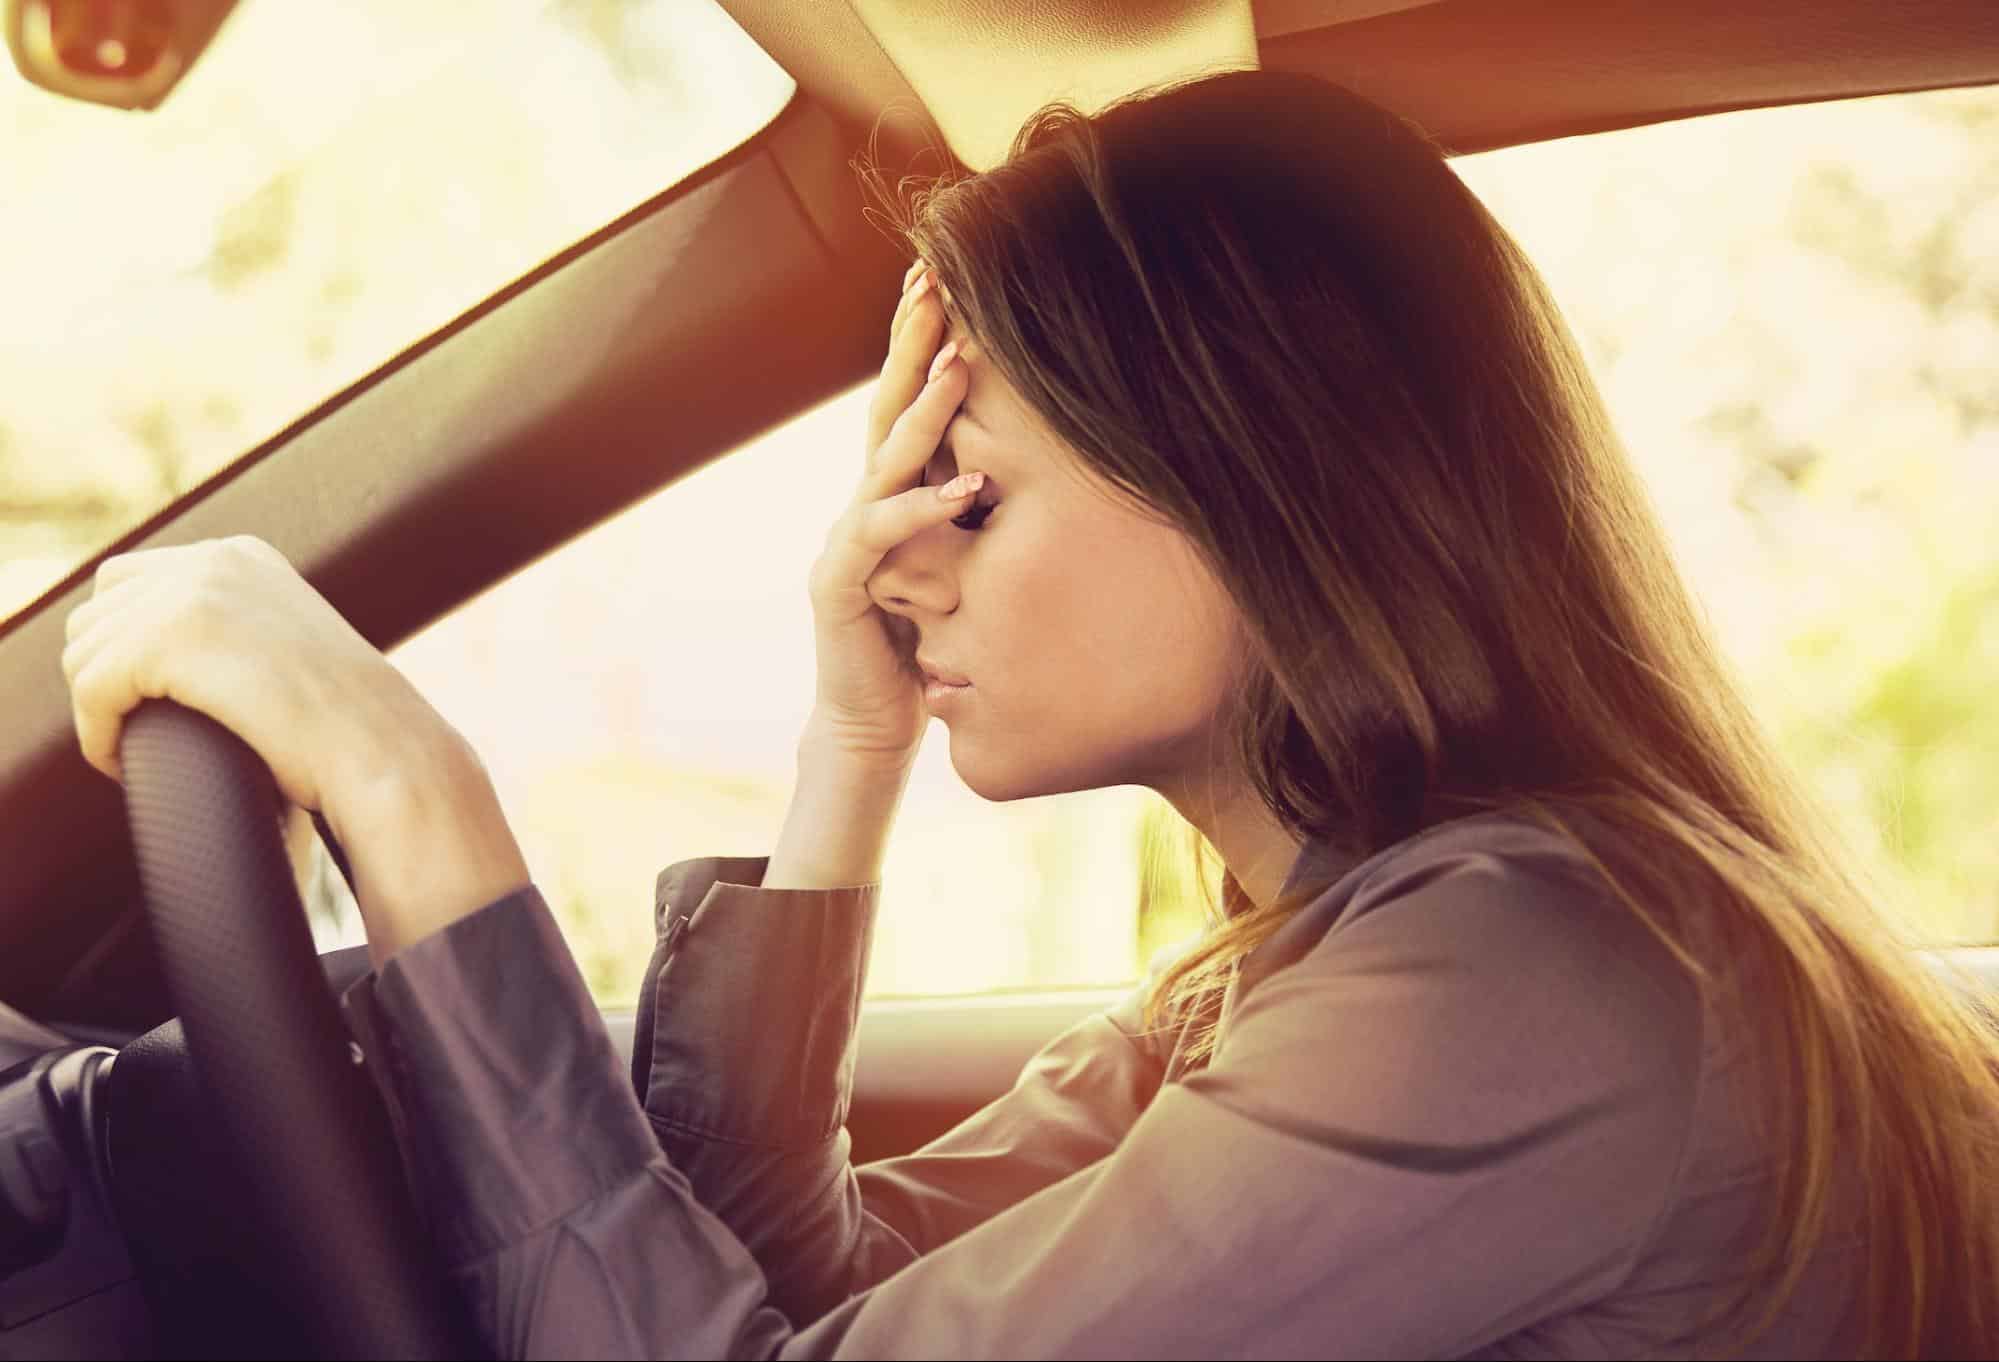 What Are The Symptoms Of PTSD After An Accident?